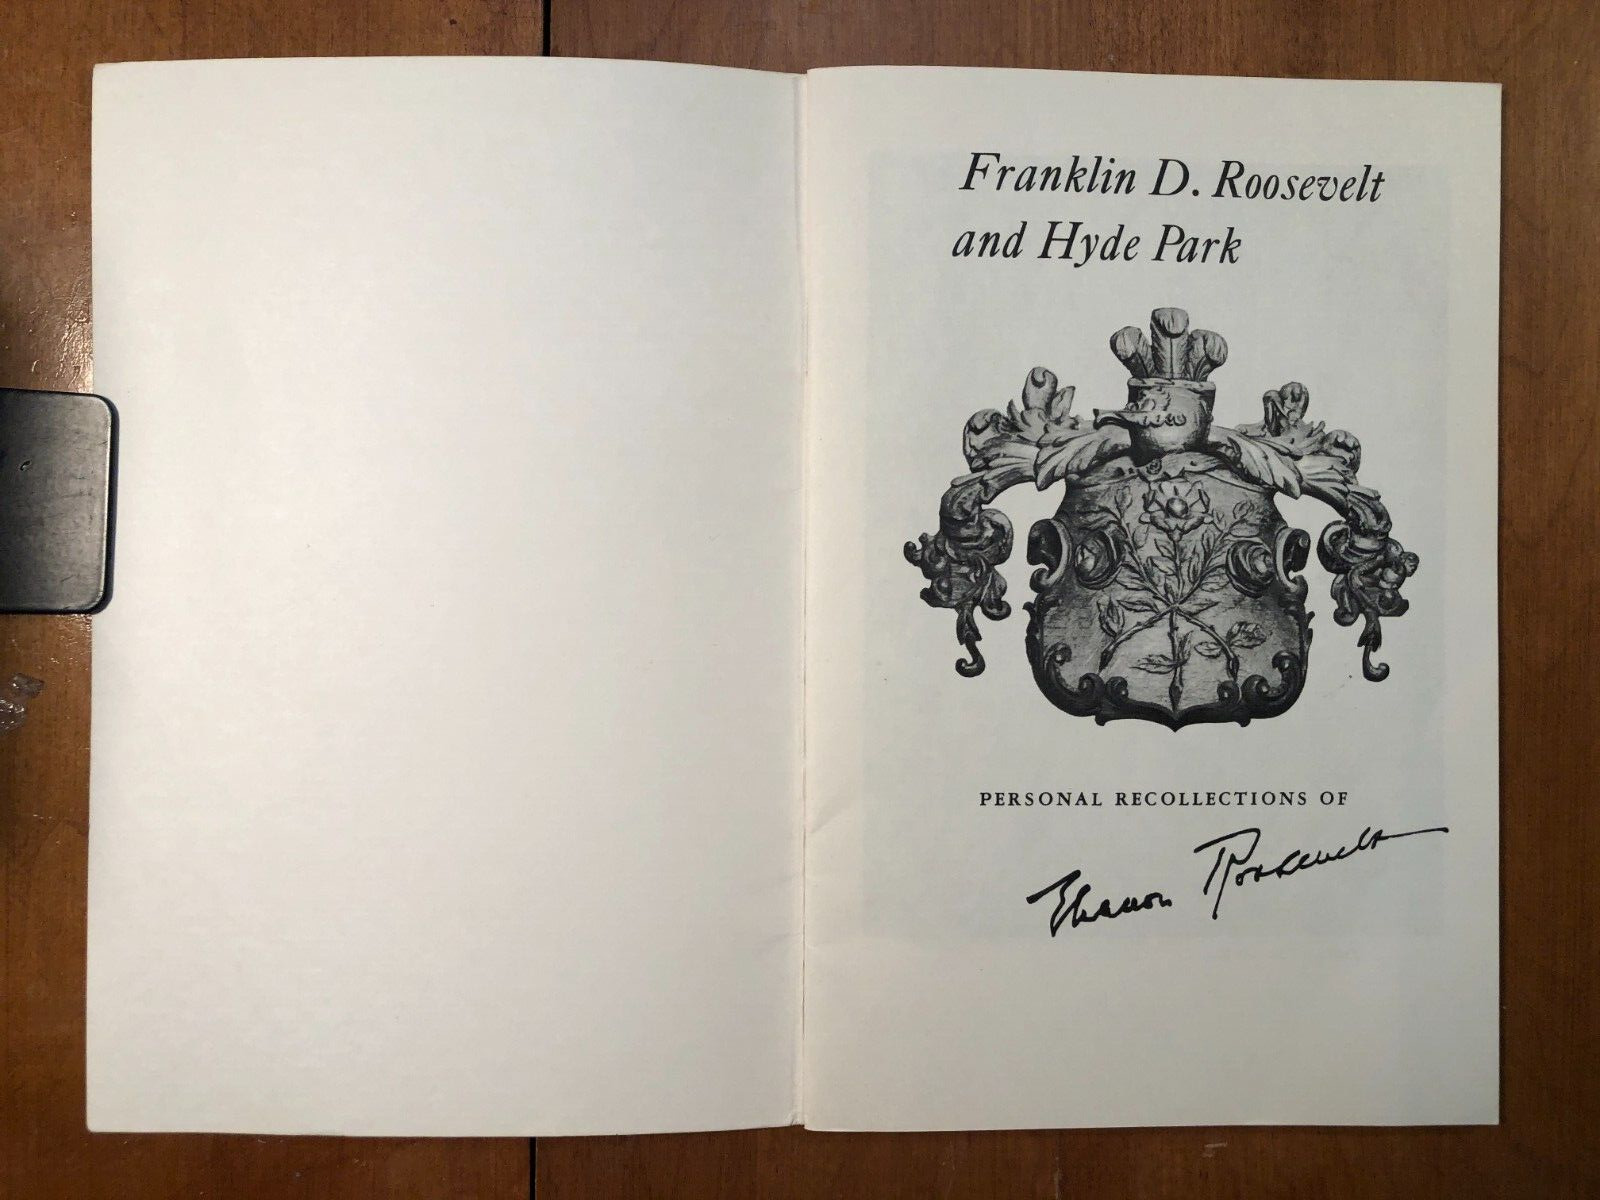 (AUTOGRAPHED) FRANKLIN D. ROOSEVELT AND HYDE PARK- PERSONAL RECOLLECTIONS OF ELA